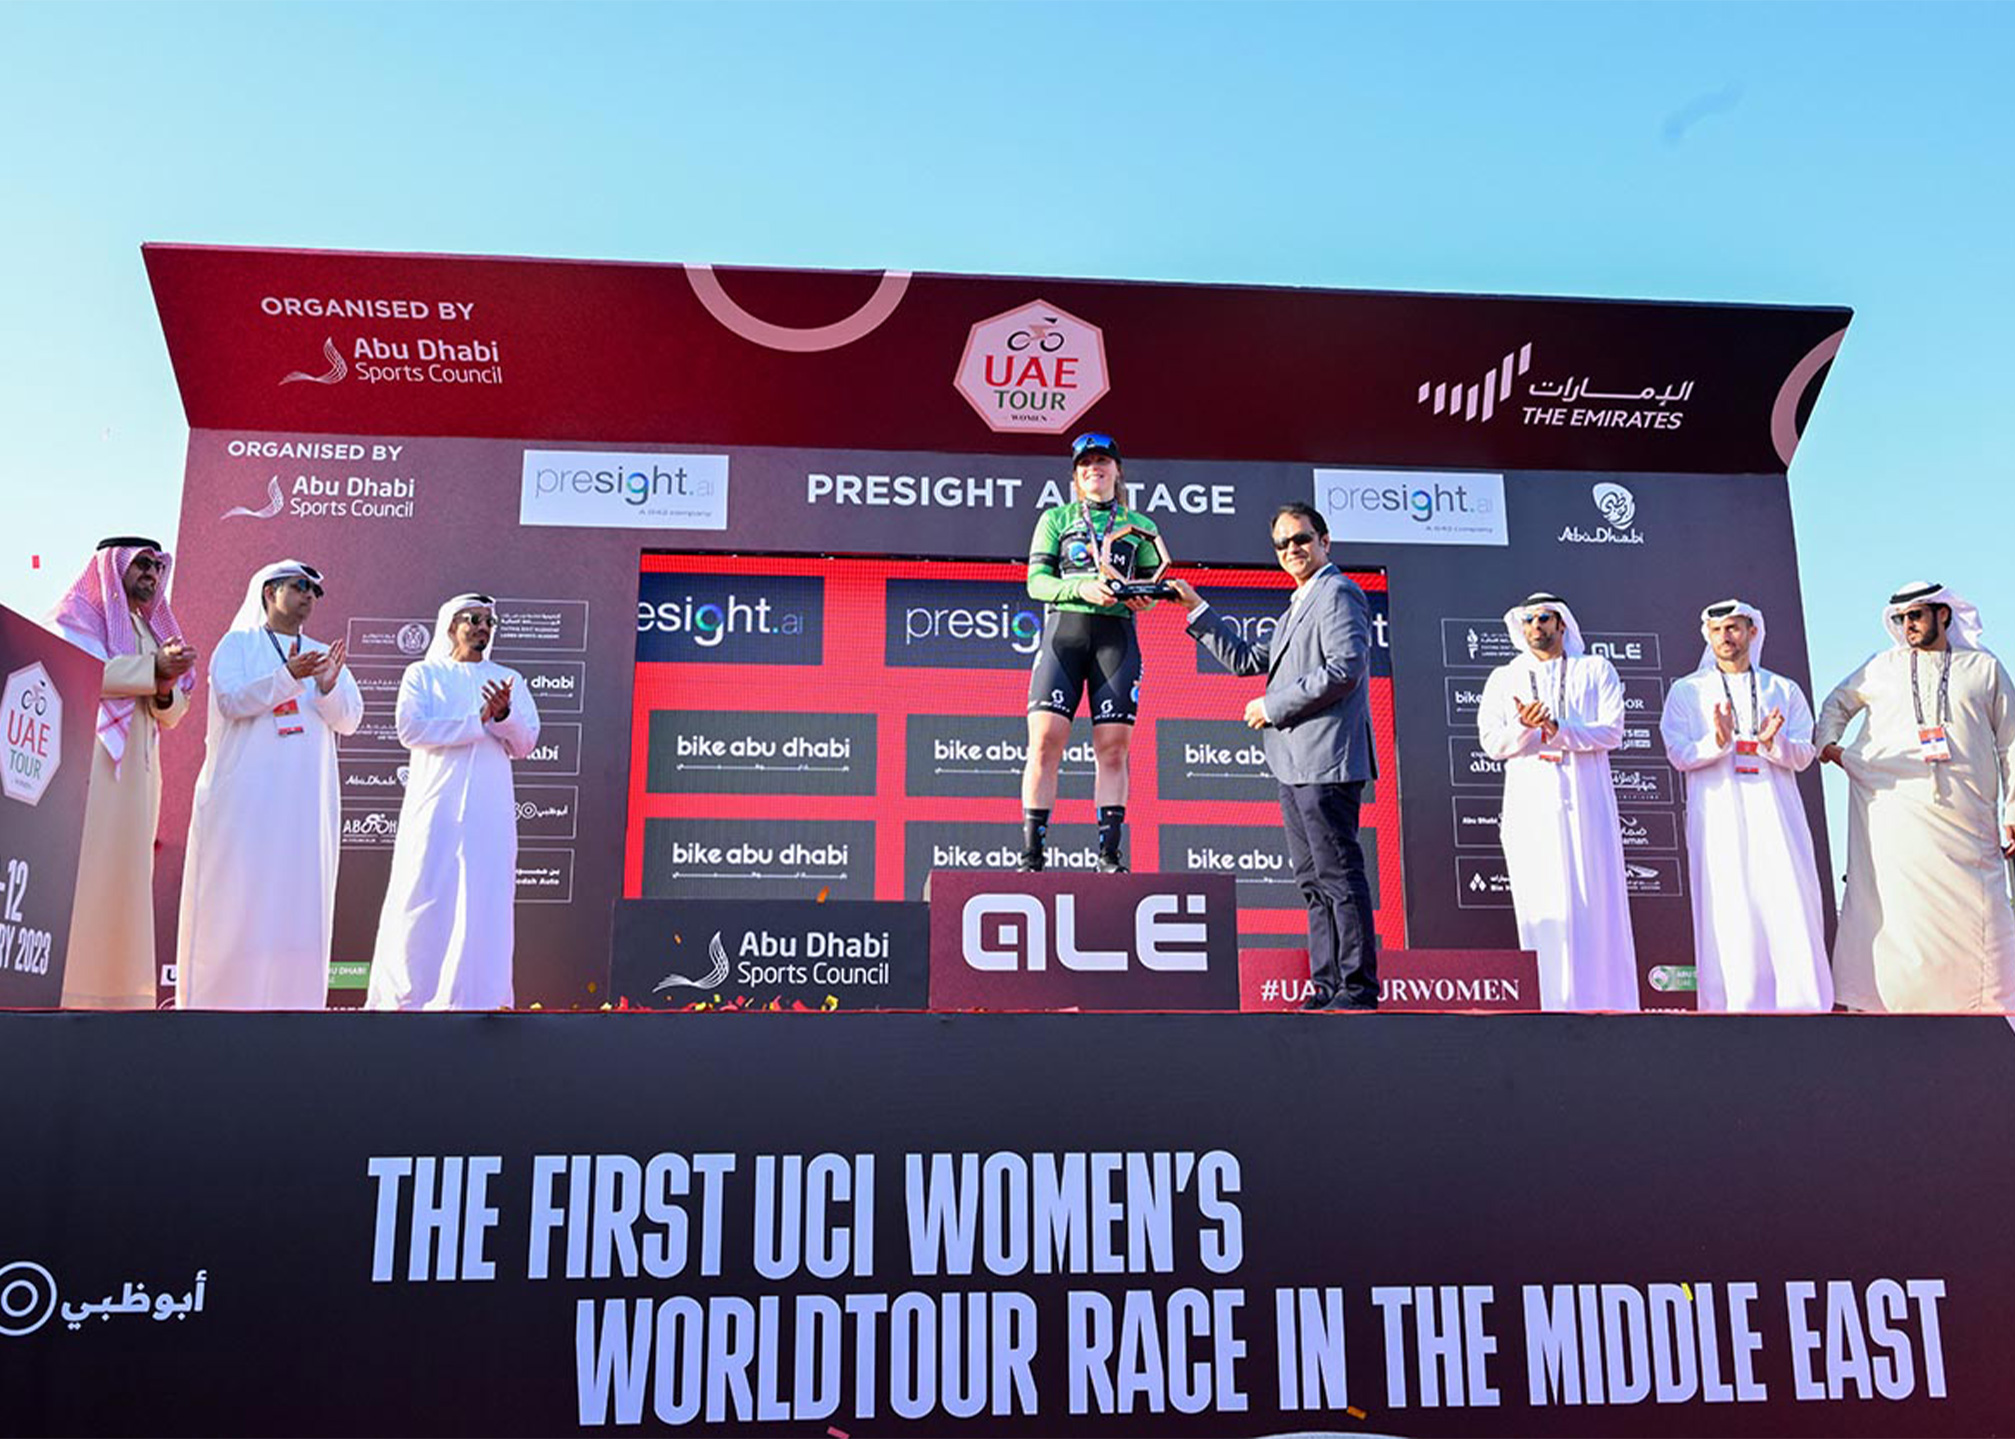 Burjeel Holdings Felicitated for Serving the First ‘UAE Tour Women’